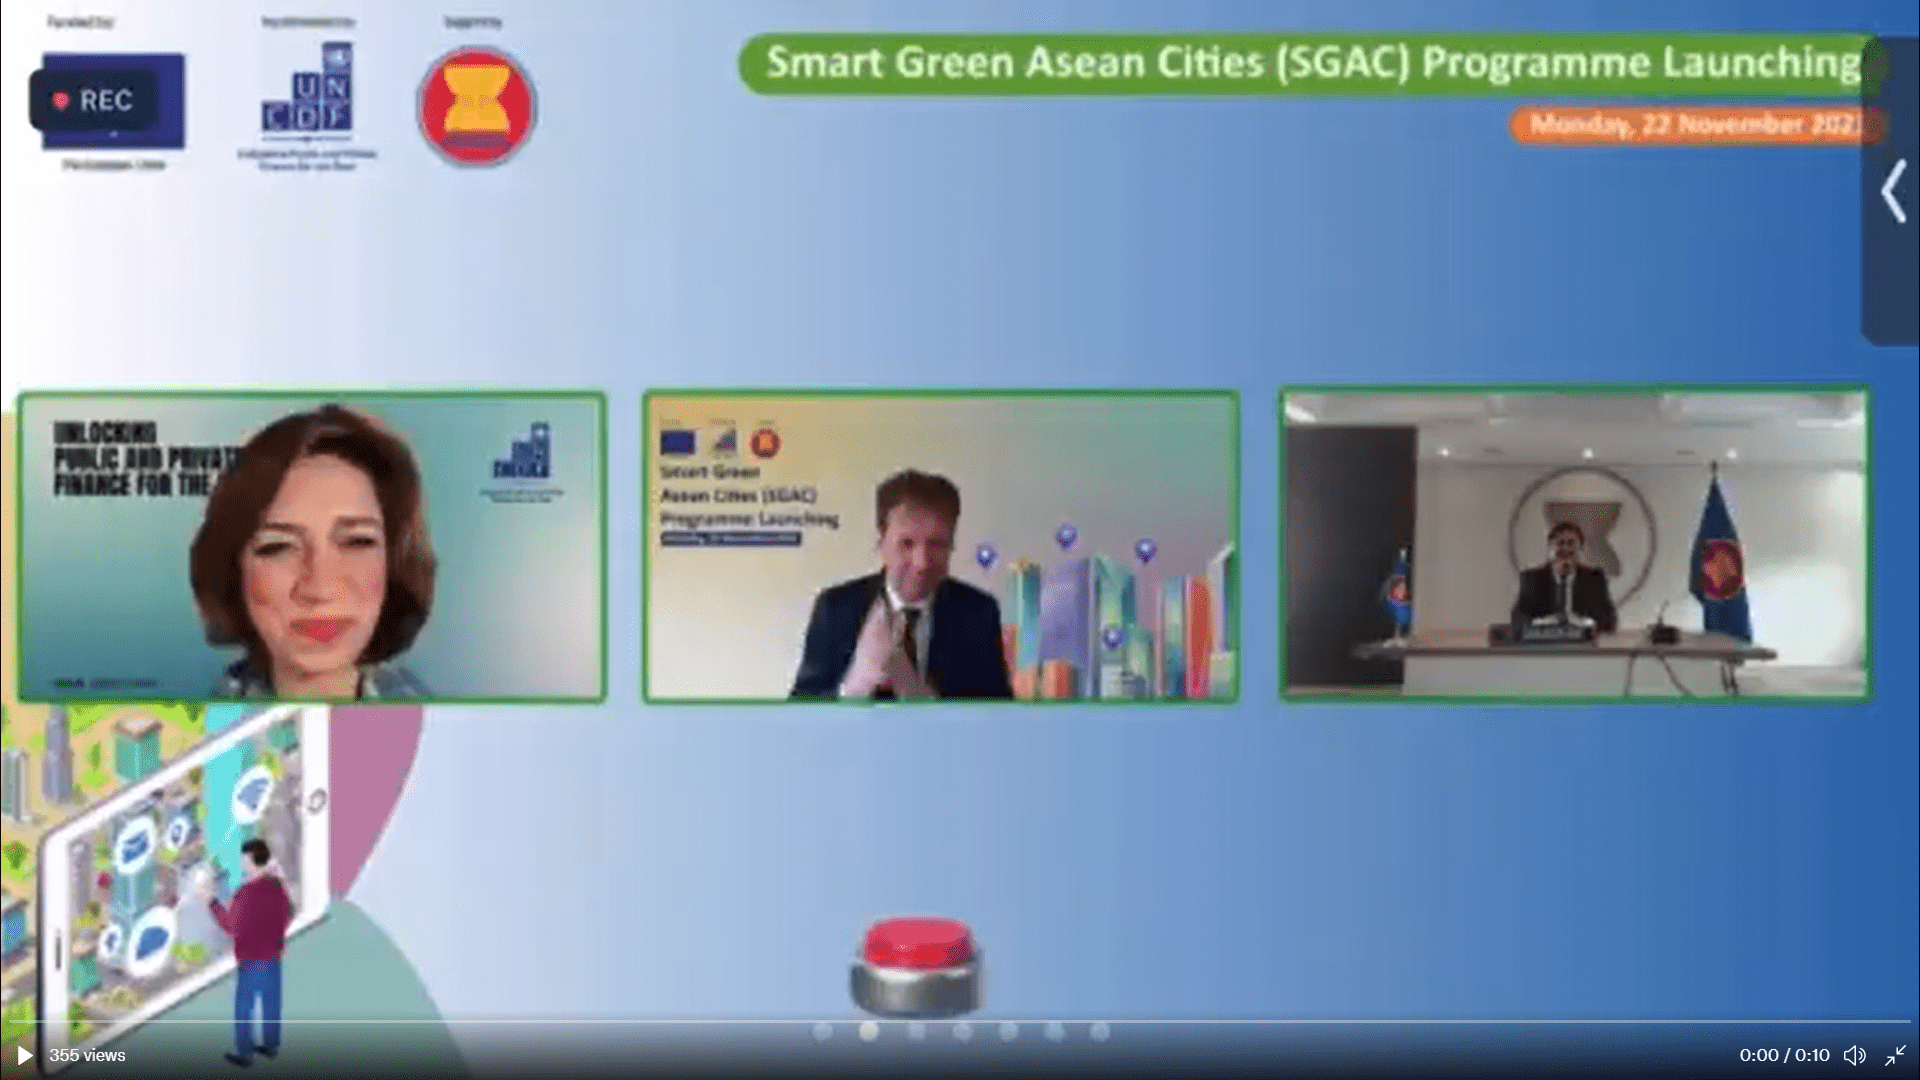 Smart Green ASEAN Cities : A New Initiative to Promote Sustainable and Smart Cities in ASEAN